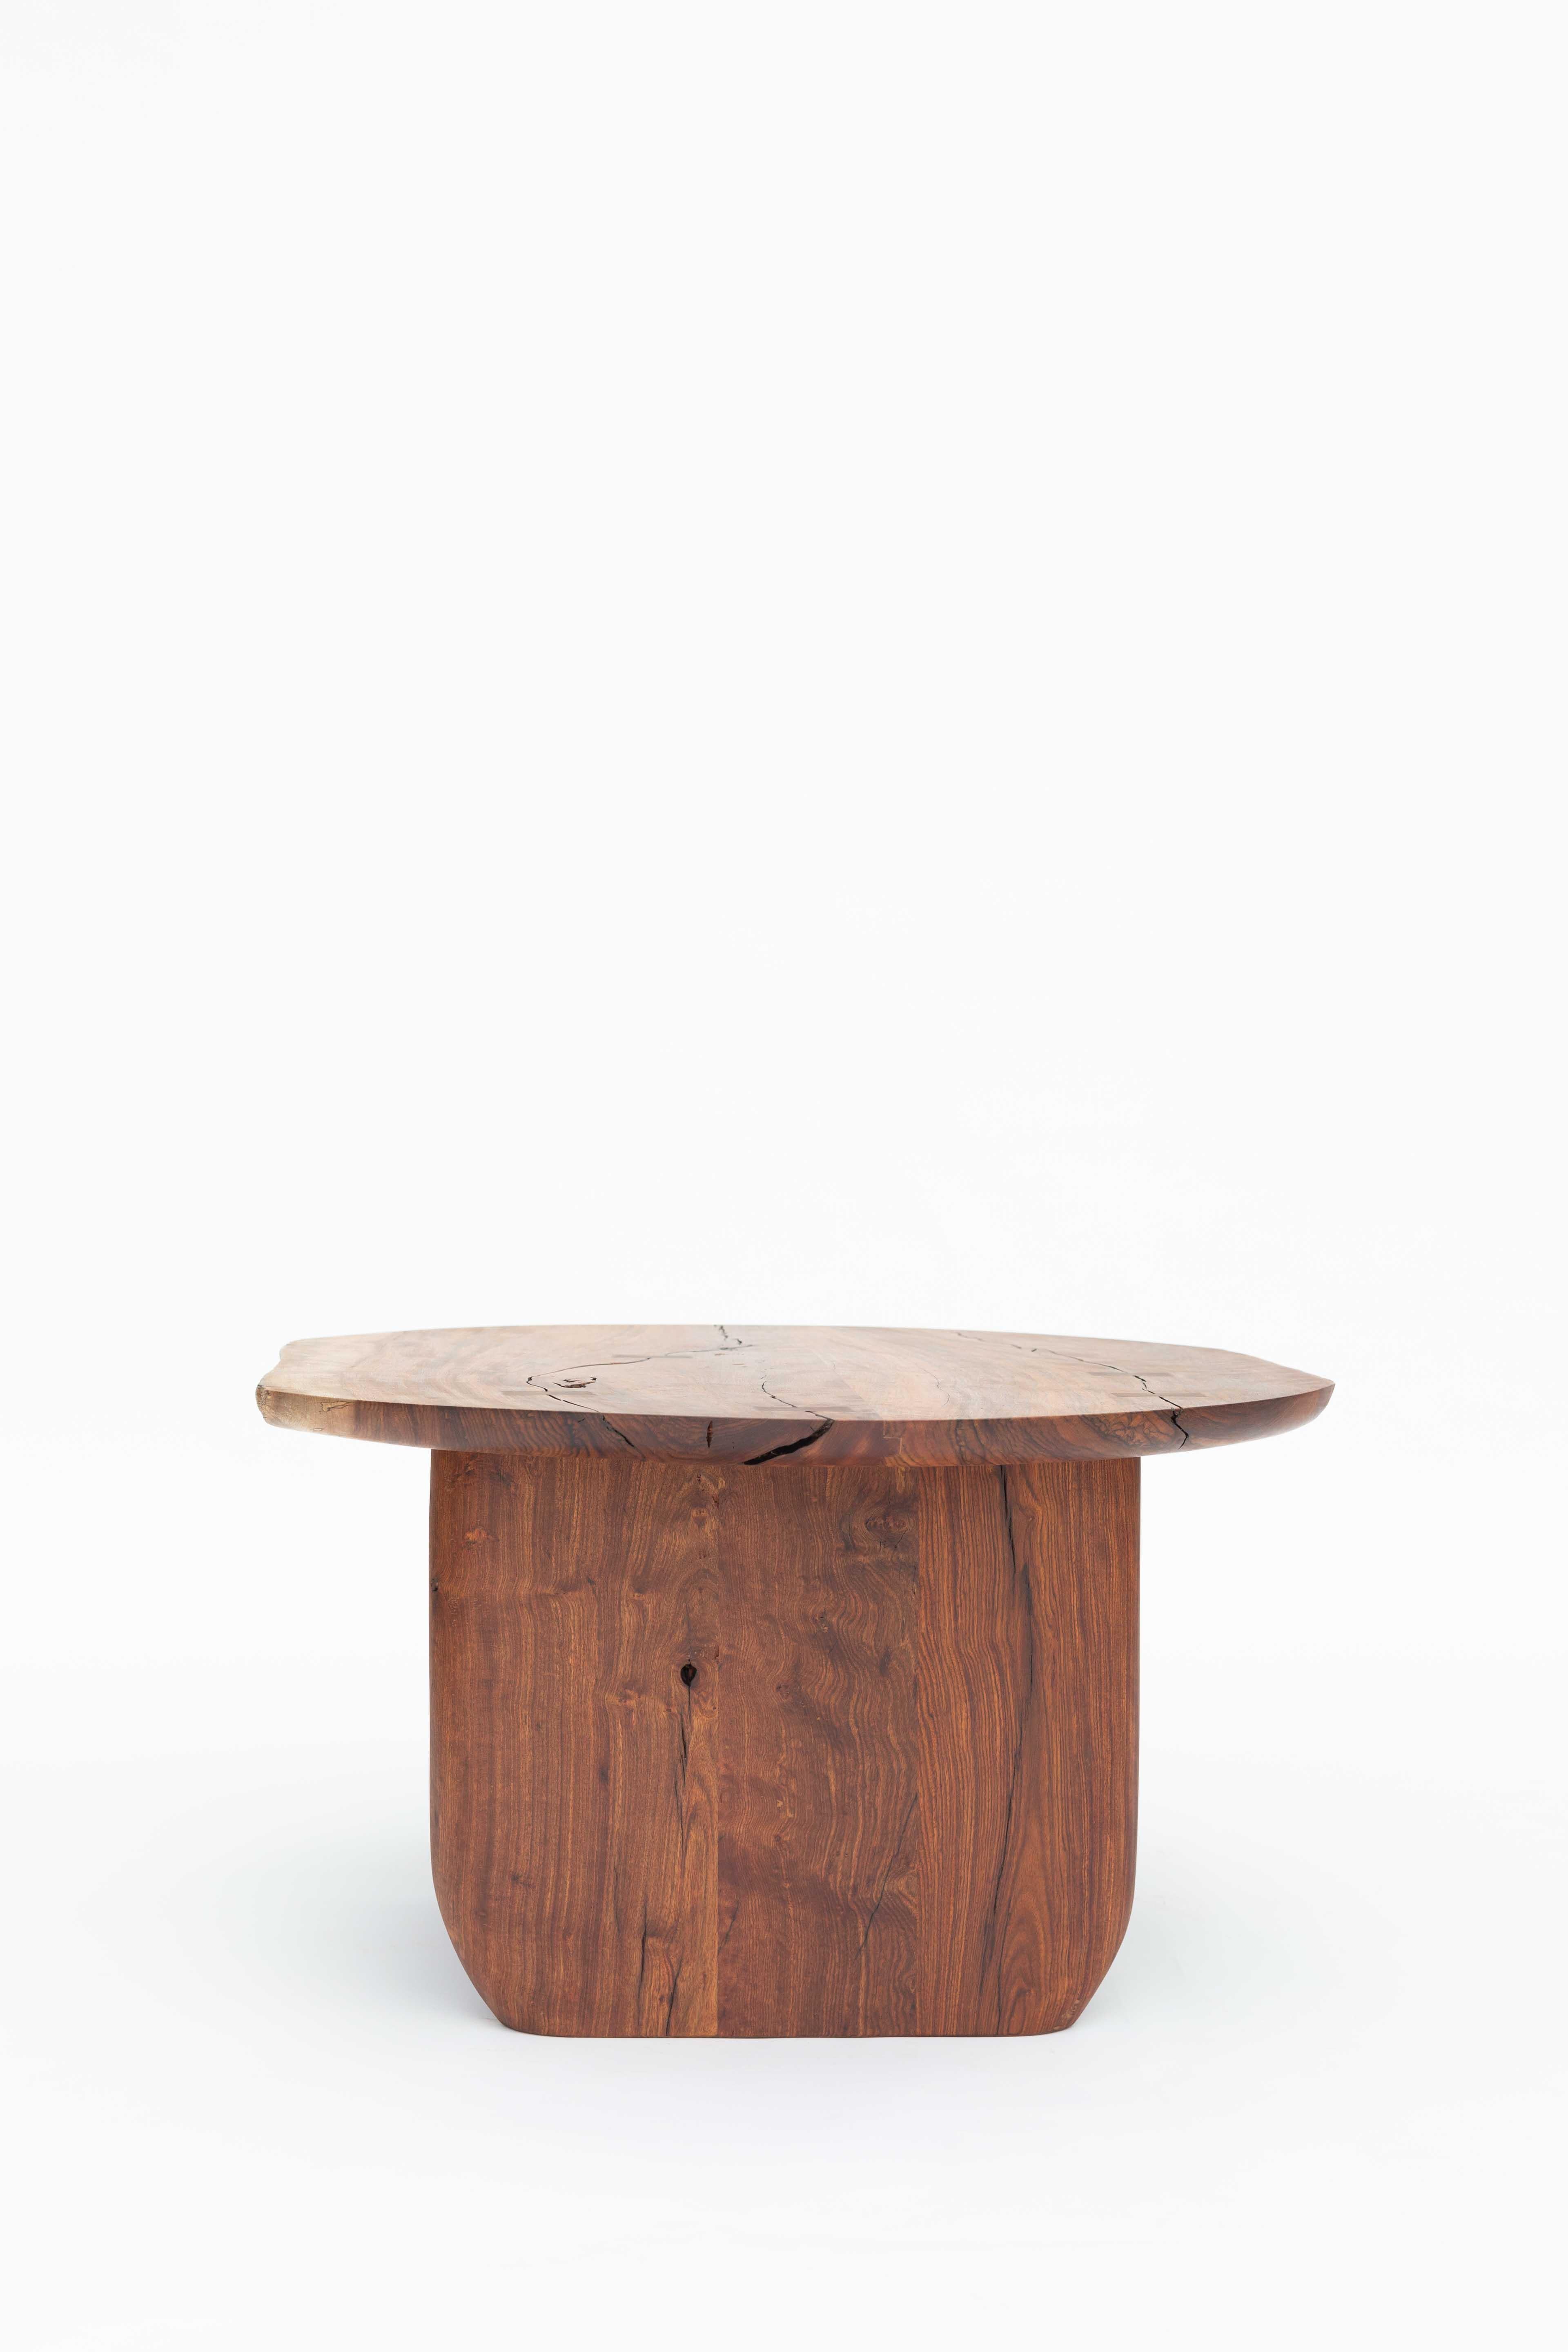 This Coffee Table is elaborated by using remarkable wood planks from the Chechen - Black Poisonwood tree, one of South Mexico’s most valued hardwoods. It is characterized by its beautiful natural drawings with color tones ranging from brown to black